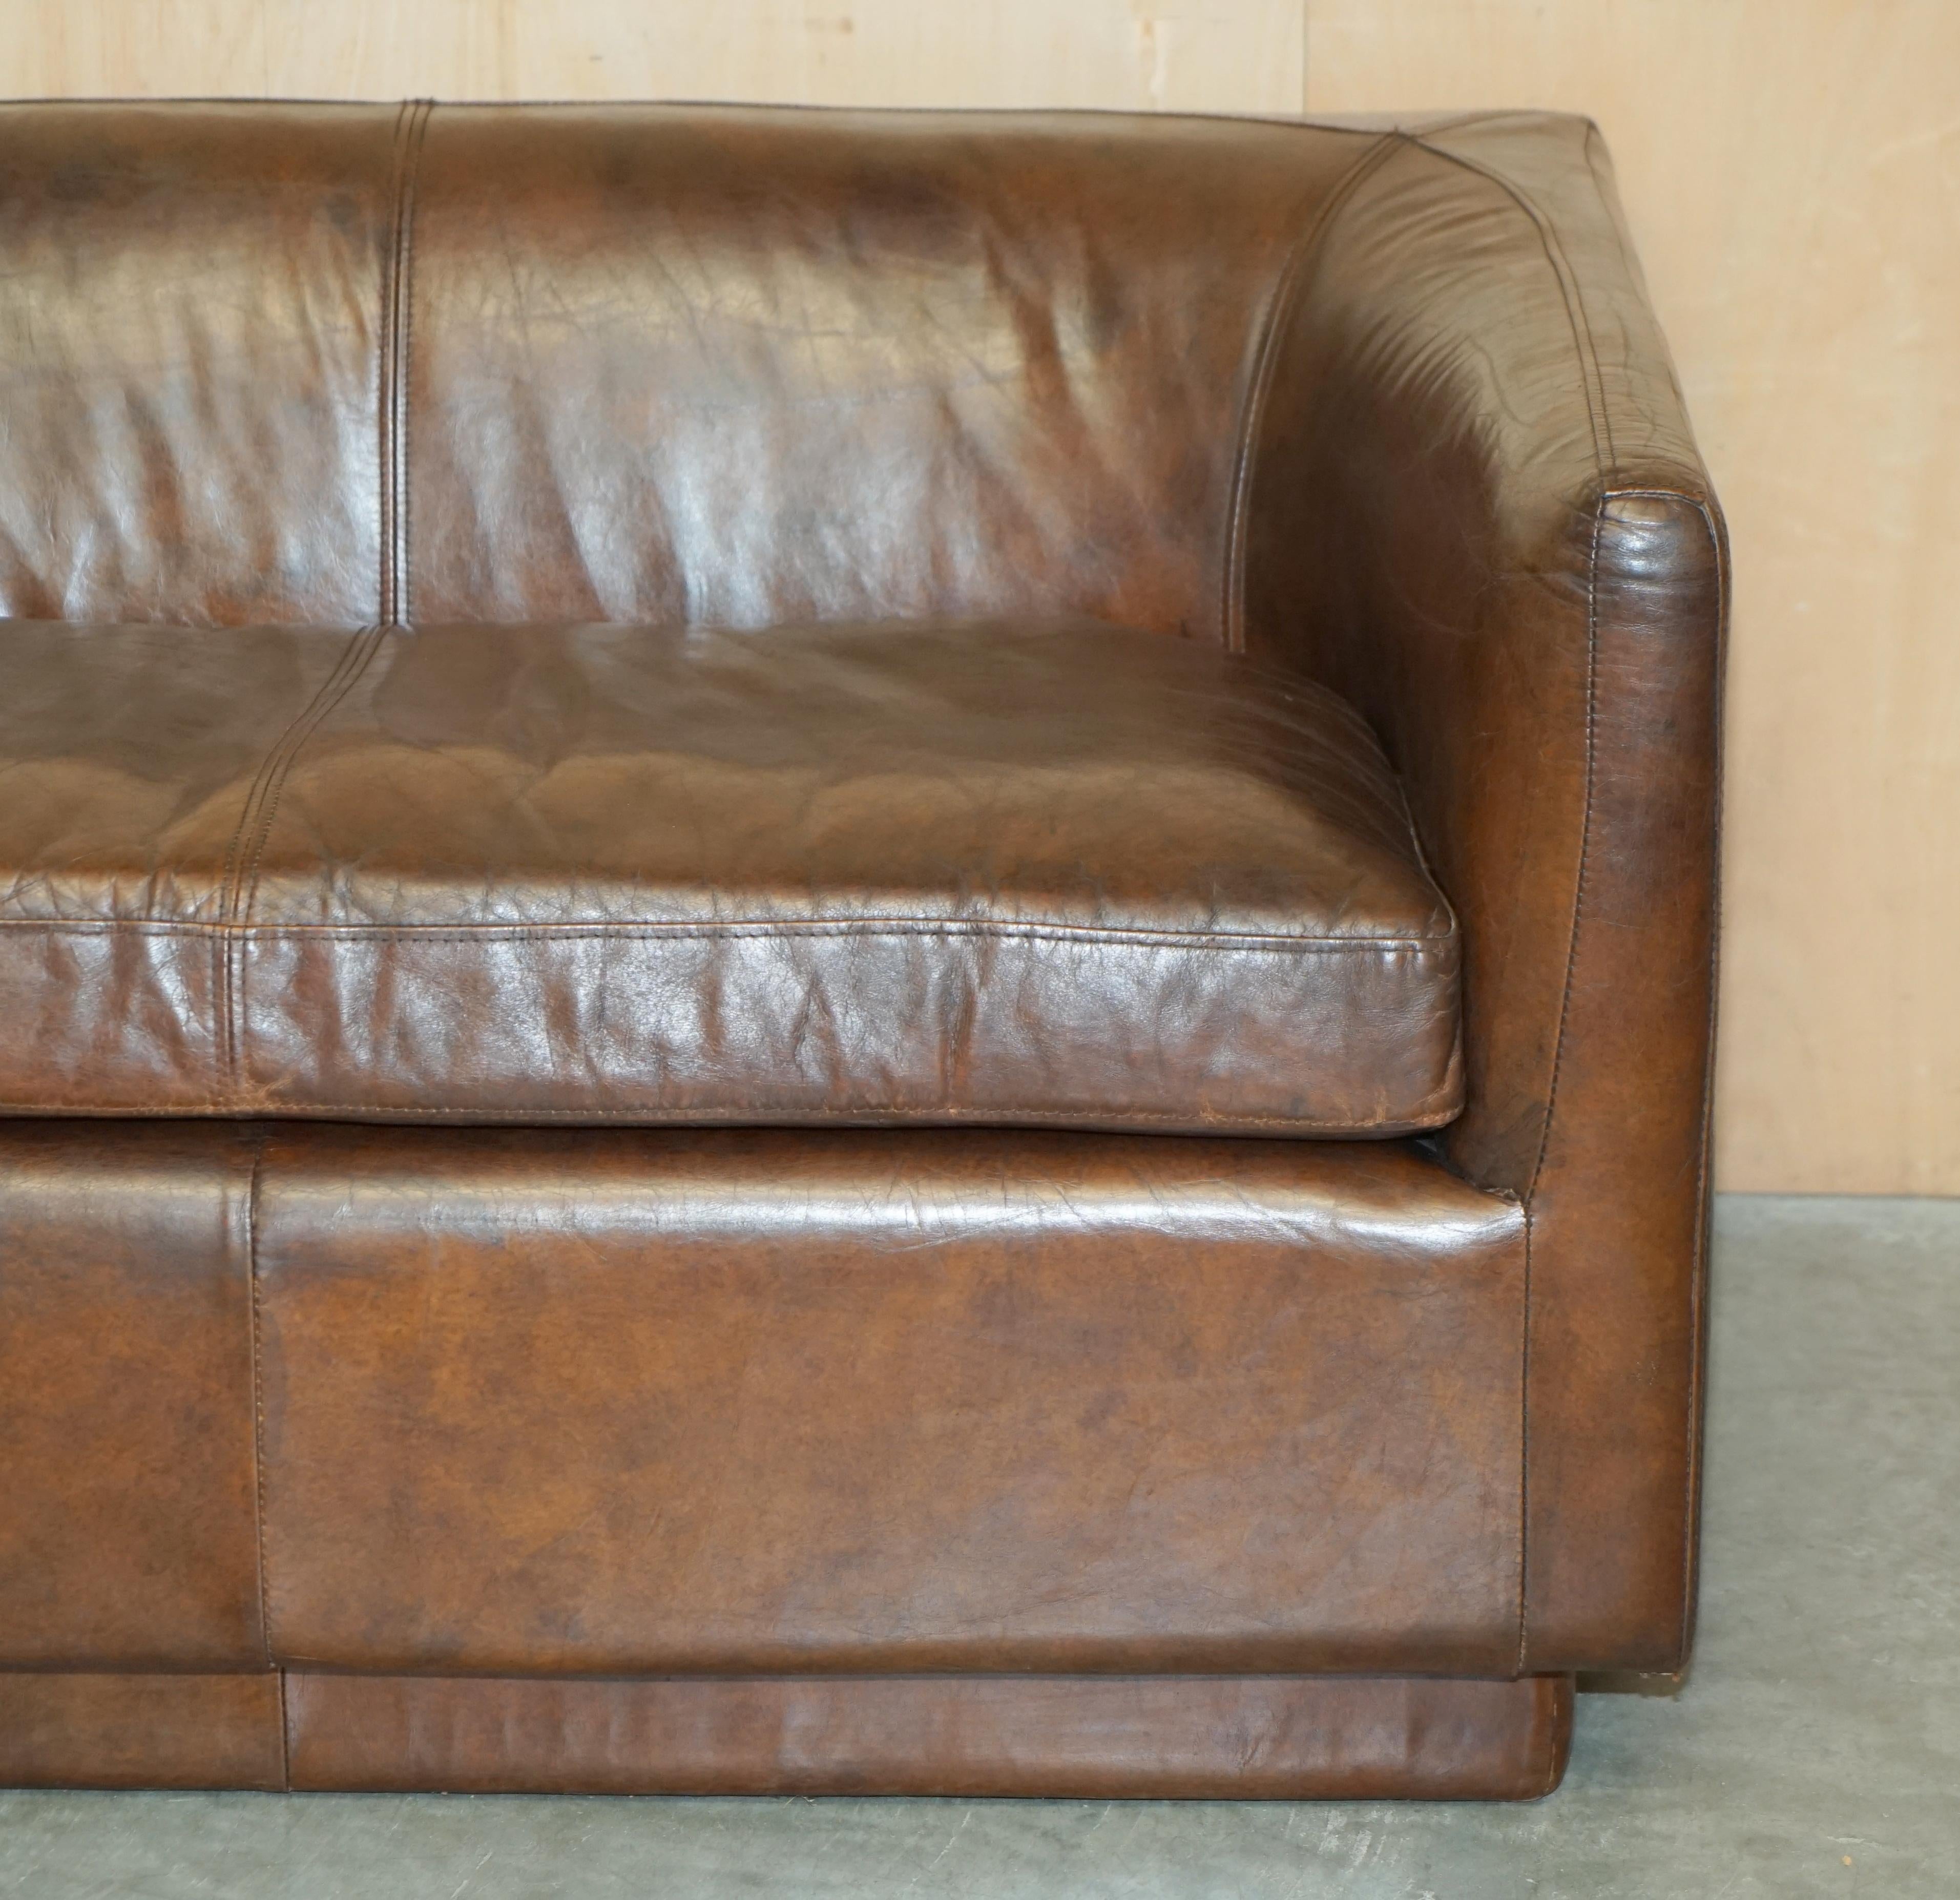 TIMOTHY OULTON ViNTAGE AGED BROWN HERITAGE 134CM WIDE SOFA STUNNING PATINA For Sale 2